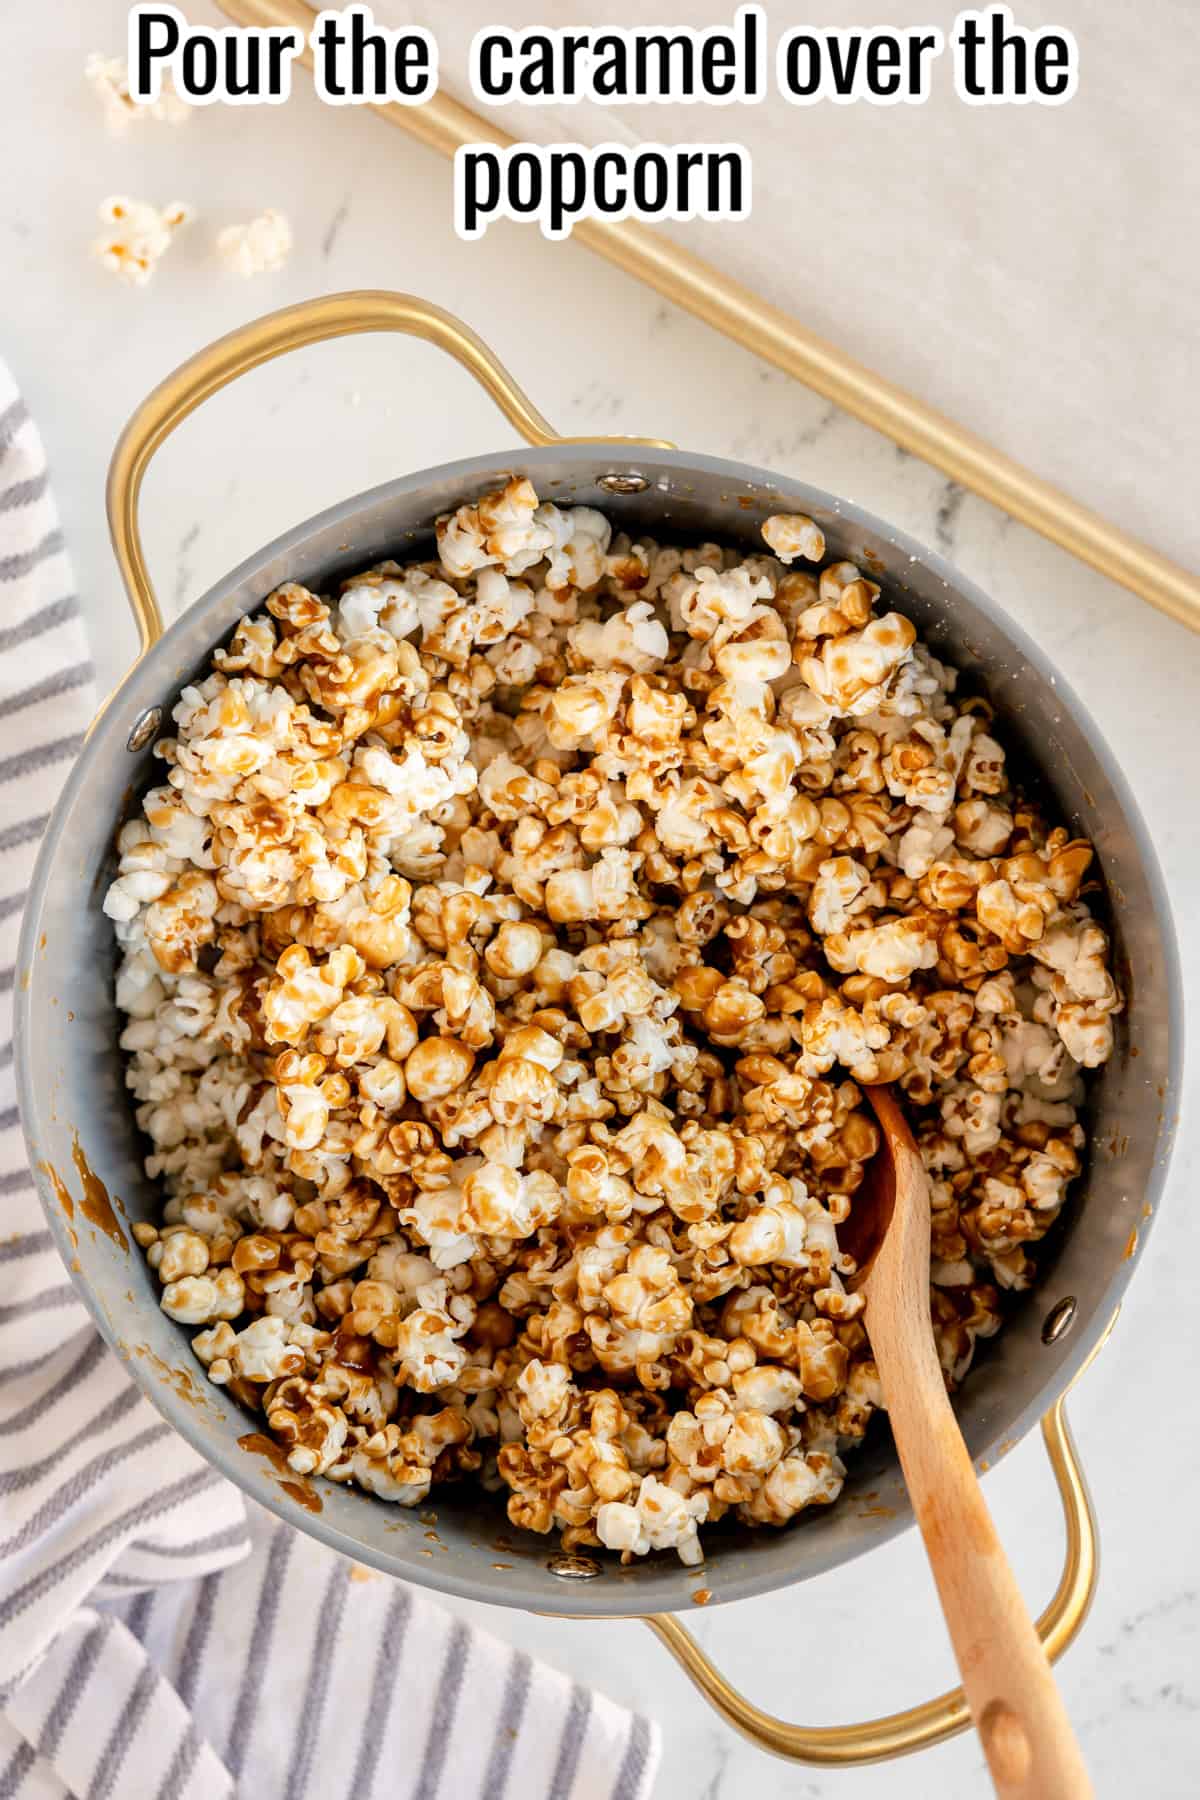 popcorn with caramel sauce over the top, unmixed.